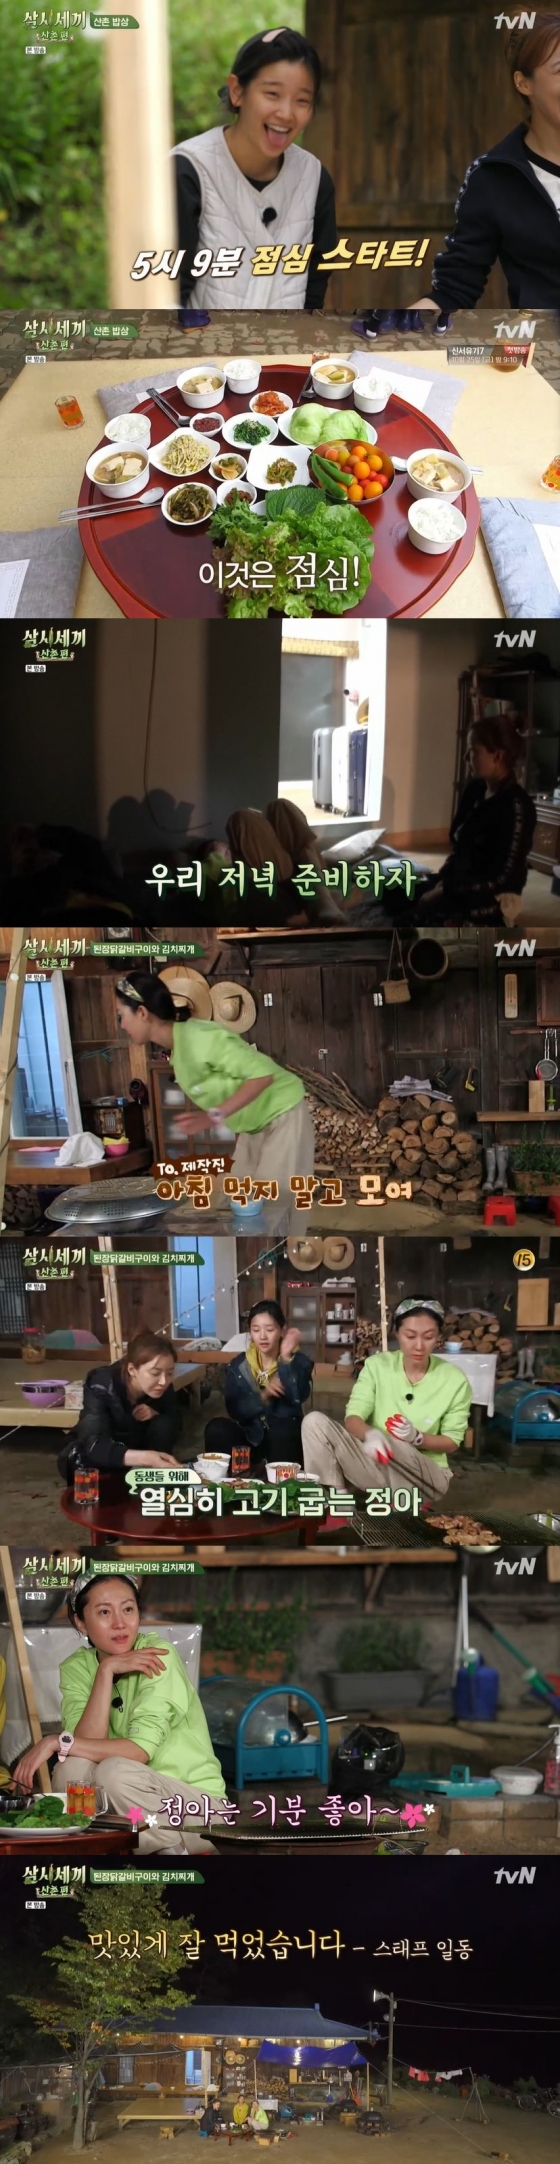 In Three Meals a Day Mountain Village, Yum Jung-ah gave the production team a generous meal.On the afternoon of the 18th, TVN entertainment program Three Meals a Day Mountain Village featured the members who greeted the end.The last lunch menu of the day was miso soup, sweet potato plot, spinach, bean sprouts.When everyone was sitting on a narrow tap for herbs, Park Seo-joon laughed, saying, I think its hard to breathe.Near the end of the cooking, Park So-dam seemed to think of something, Did the palace get out?I asked, and when I heard the answer, I said, I have to fry my guest eggs. Yum Jung-ah said, Seo Jun will not want to eat it now. Park Seo-joon also said, I will eat at the rest stop on the way, considering the late lunch time.So they started eating lunch at around 5 pm. The members laughed, saying, When do you eat dinner?Park So-dam, who was talking about the menu the next day while eating lunch, said, I did not call it beans. Park said, I do not think it is a big deal.I will blow well. Yum Jung-ah said, Are you the other person? When we finished lunch, it was time for Park to leave. Park left the Sakui House after the members were sent off.After taking such a sufficient break, the members gathered back into the yard for dinner; the dinner menu was kimchi stew and miso chicken ribs.This is a menu decided by Yum Jung-ah after a hard time, and Yum Jung-ah studied menus and recipes every time there was no usual shooting.The members also prepared dinner and called beans for the next mornings beans.Yum Jung-ah was called a big hand like a big hand, and later realized that he was called too much beans again?I do not eat breakfast tomorrow, he suggested once again.Yum Jung-ah continued to bake chicken ribs for his younger siblings, and Yoon Se-ah wrapped them up for such Yum Jung-ah.Yum Jung-ah also handed out meat to the crew; Yum Jung-ah, who looked at the deliciously-eating crew, said, I feel so good when I eat it so delicious.Its really soft, soft and delicious, its okay to eat it with chicken ribs, said Yoon Se-ah.The next morning, the last meal, was steamed pork ribs and a non-jiji stew. The members finished their meal as satisfied as usual.For those who were washing dishes after meals, Na Young-seok PD has offered suggestions.Yum Jung-ah said that if he did 20 jump ropes, he would do the dishes himself. Yum Jung-ah was successful in the existing awkwardness and Na Young-seok PD was in charge of the dishes.